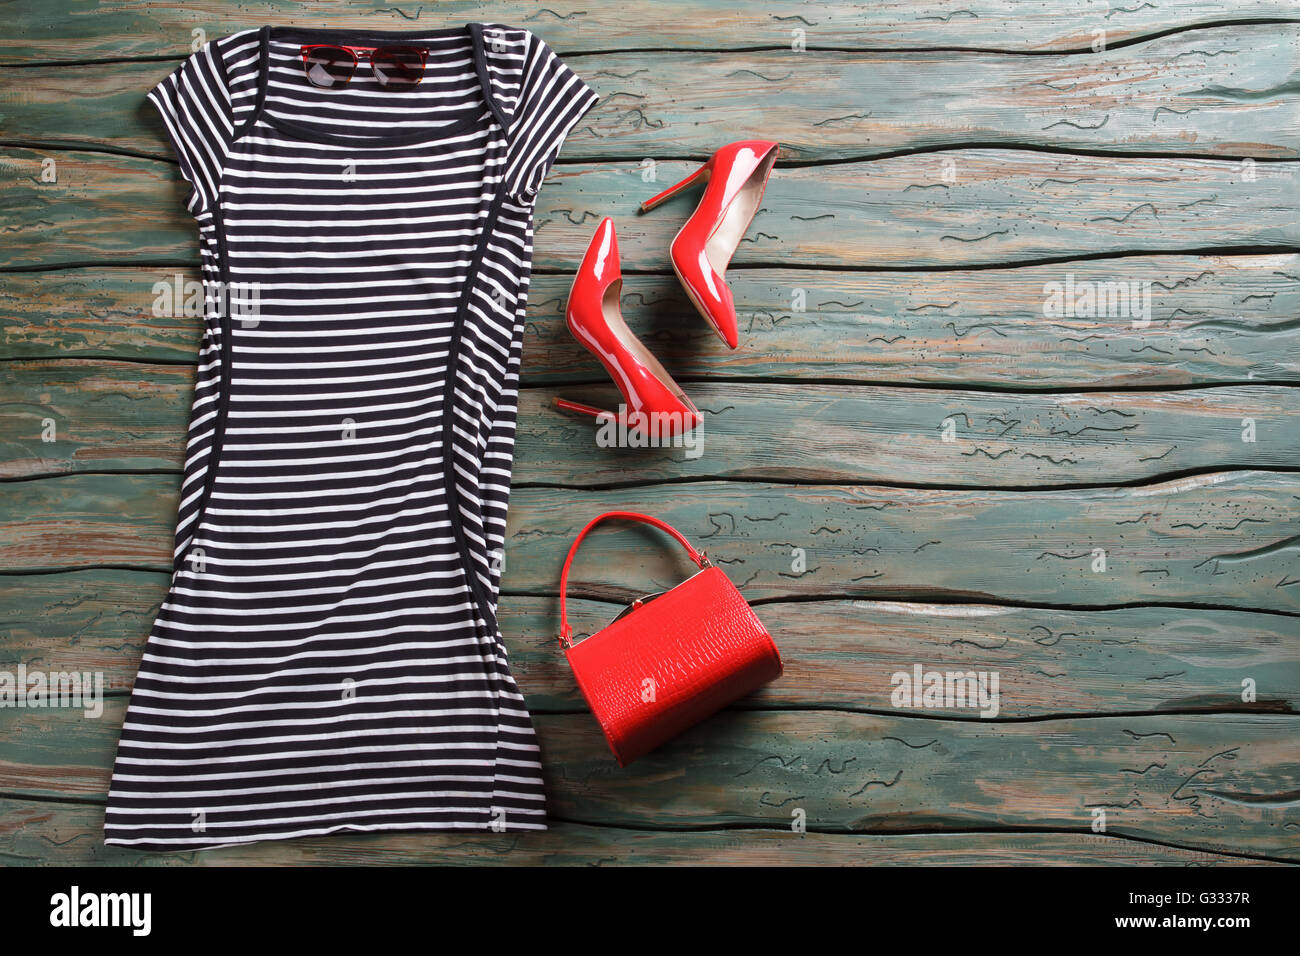 Striped dress and heel shoes Stock Photo - Alamy